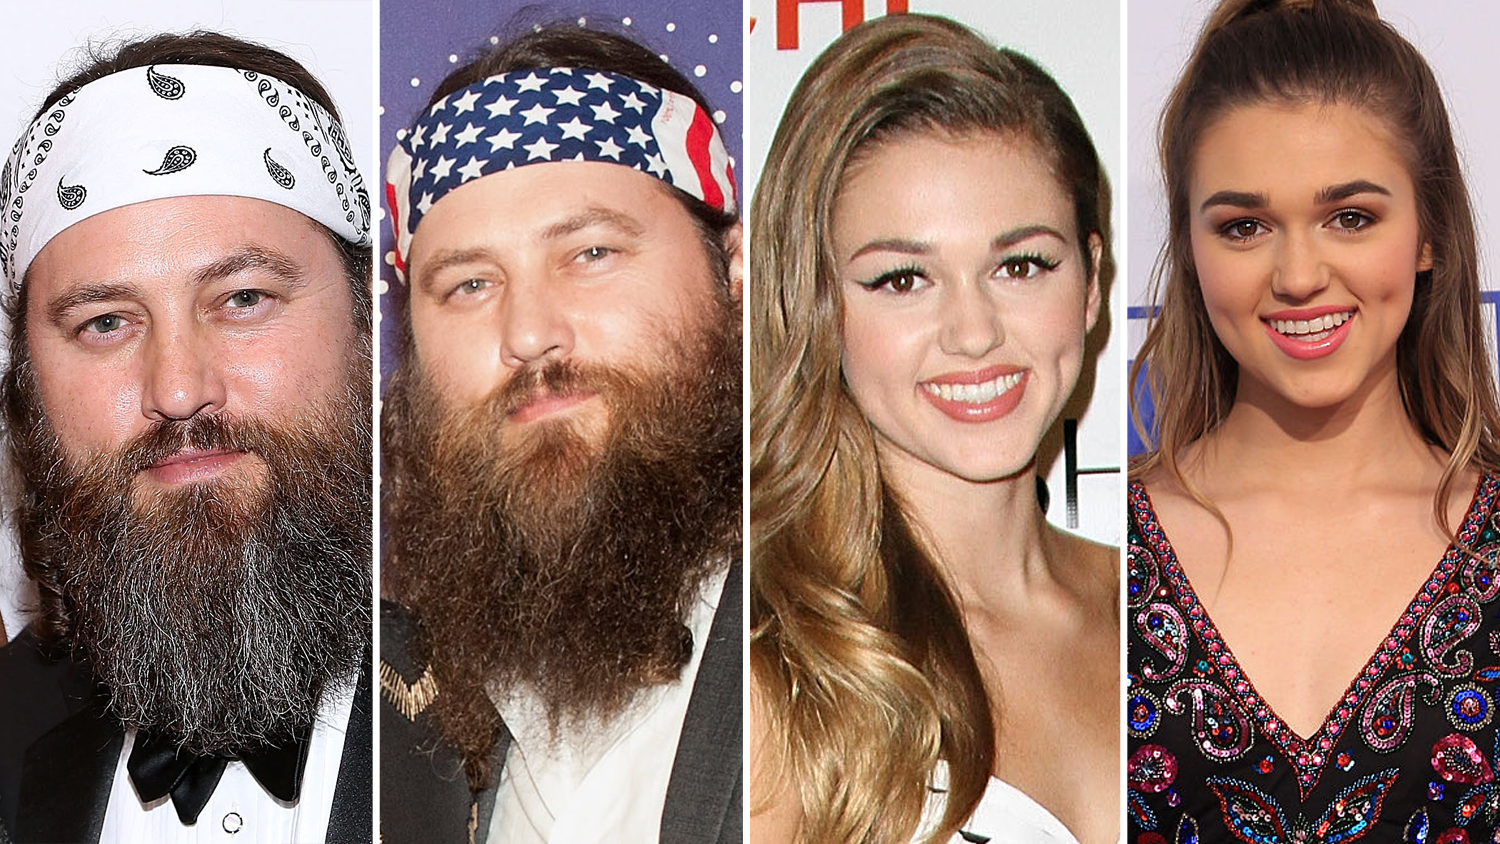 The Cast Of "Duck Dynasty" In Their First Season Vs. Now